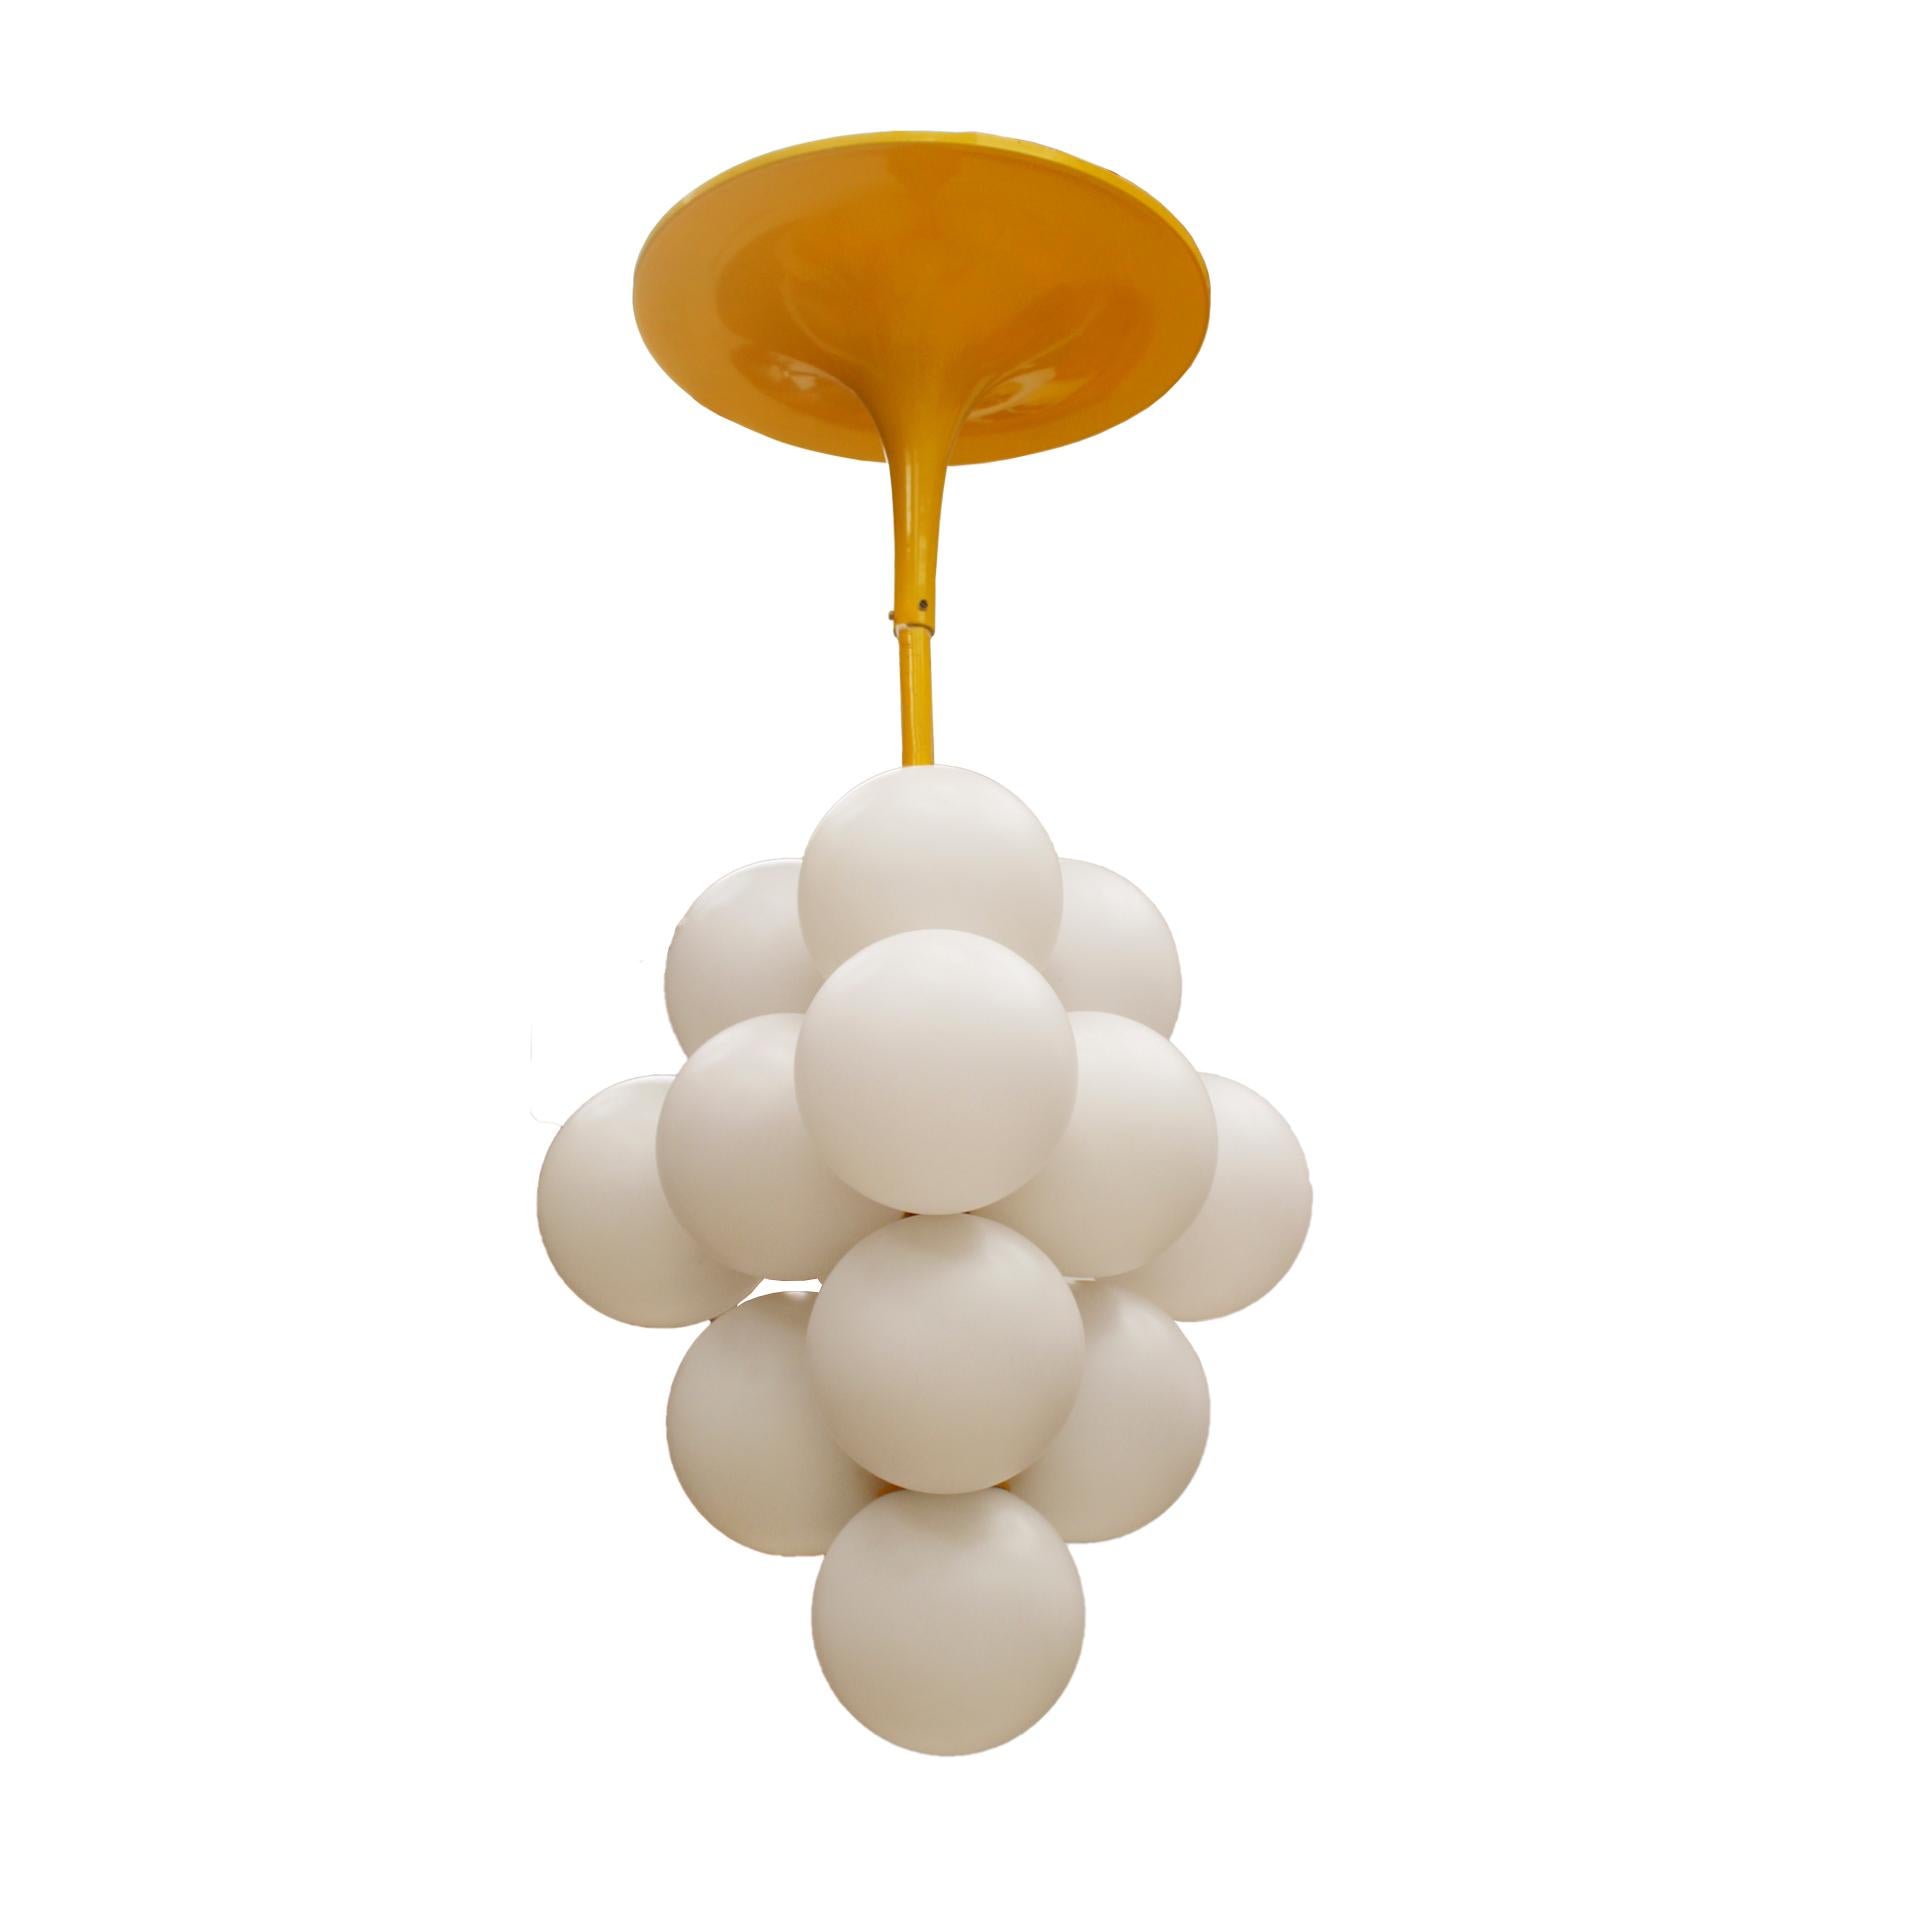 This Italian ceiling lamp from the 1970s is a stunning piece that exudes retro elegance. The centerpiece is a yellow lacquered metallic inverted trumpet-shaped rosette. Suspended from the rosette are several rounded opaline shades, carefully